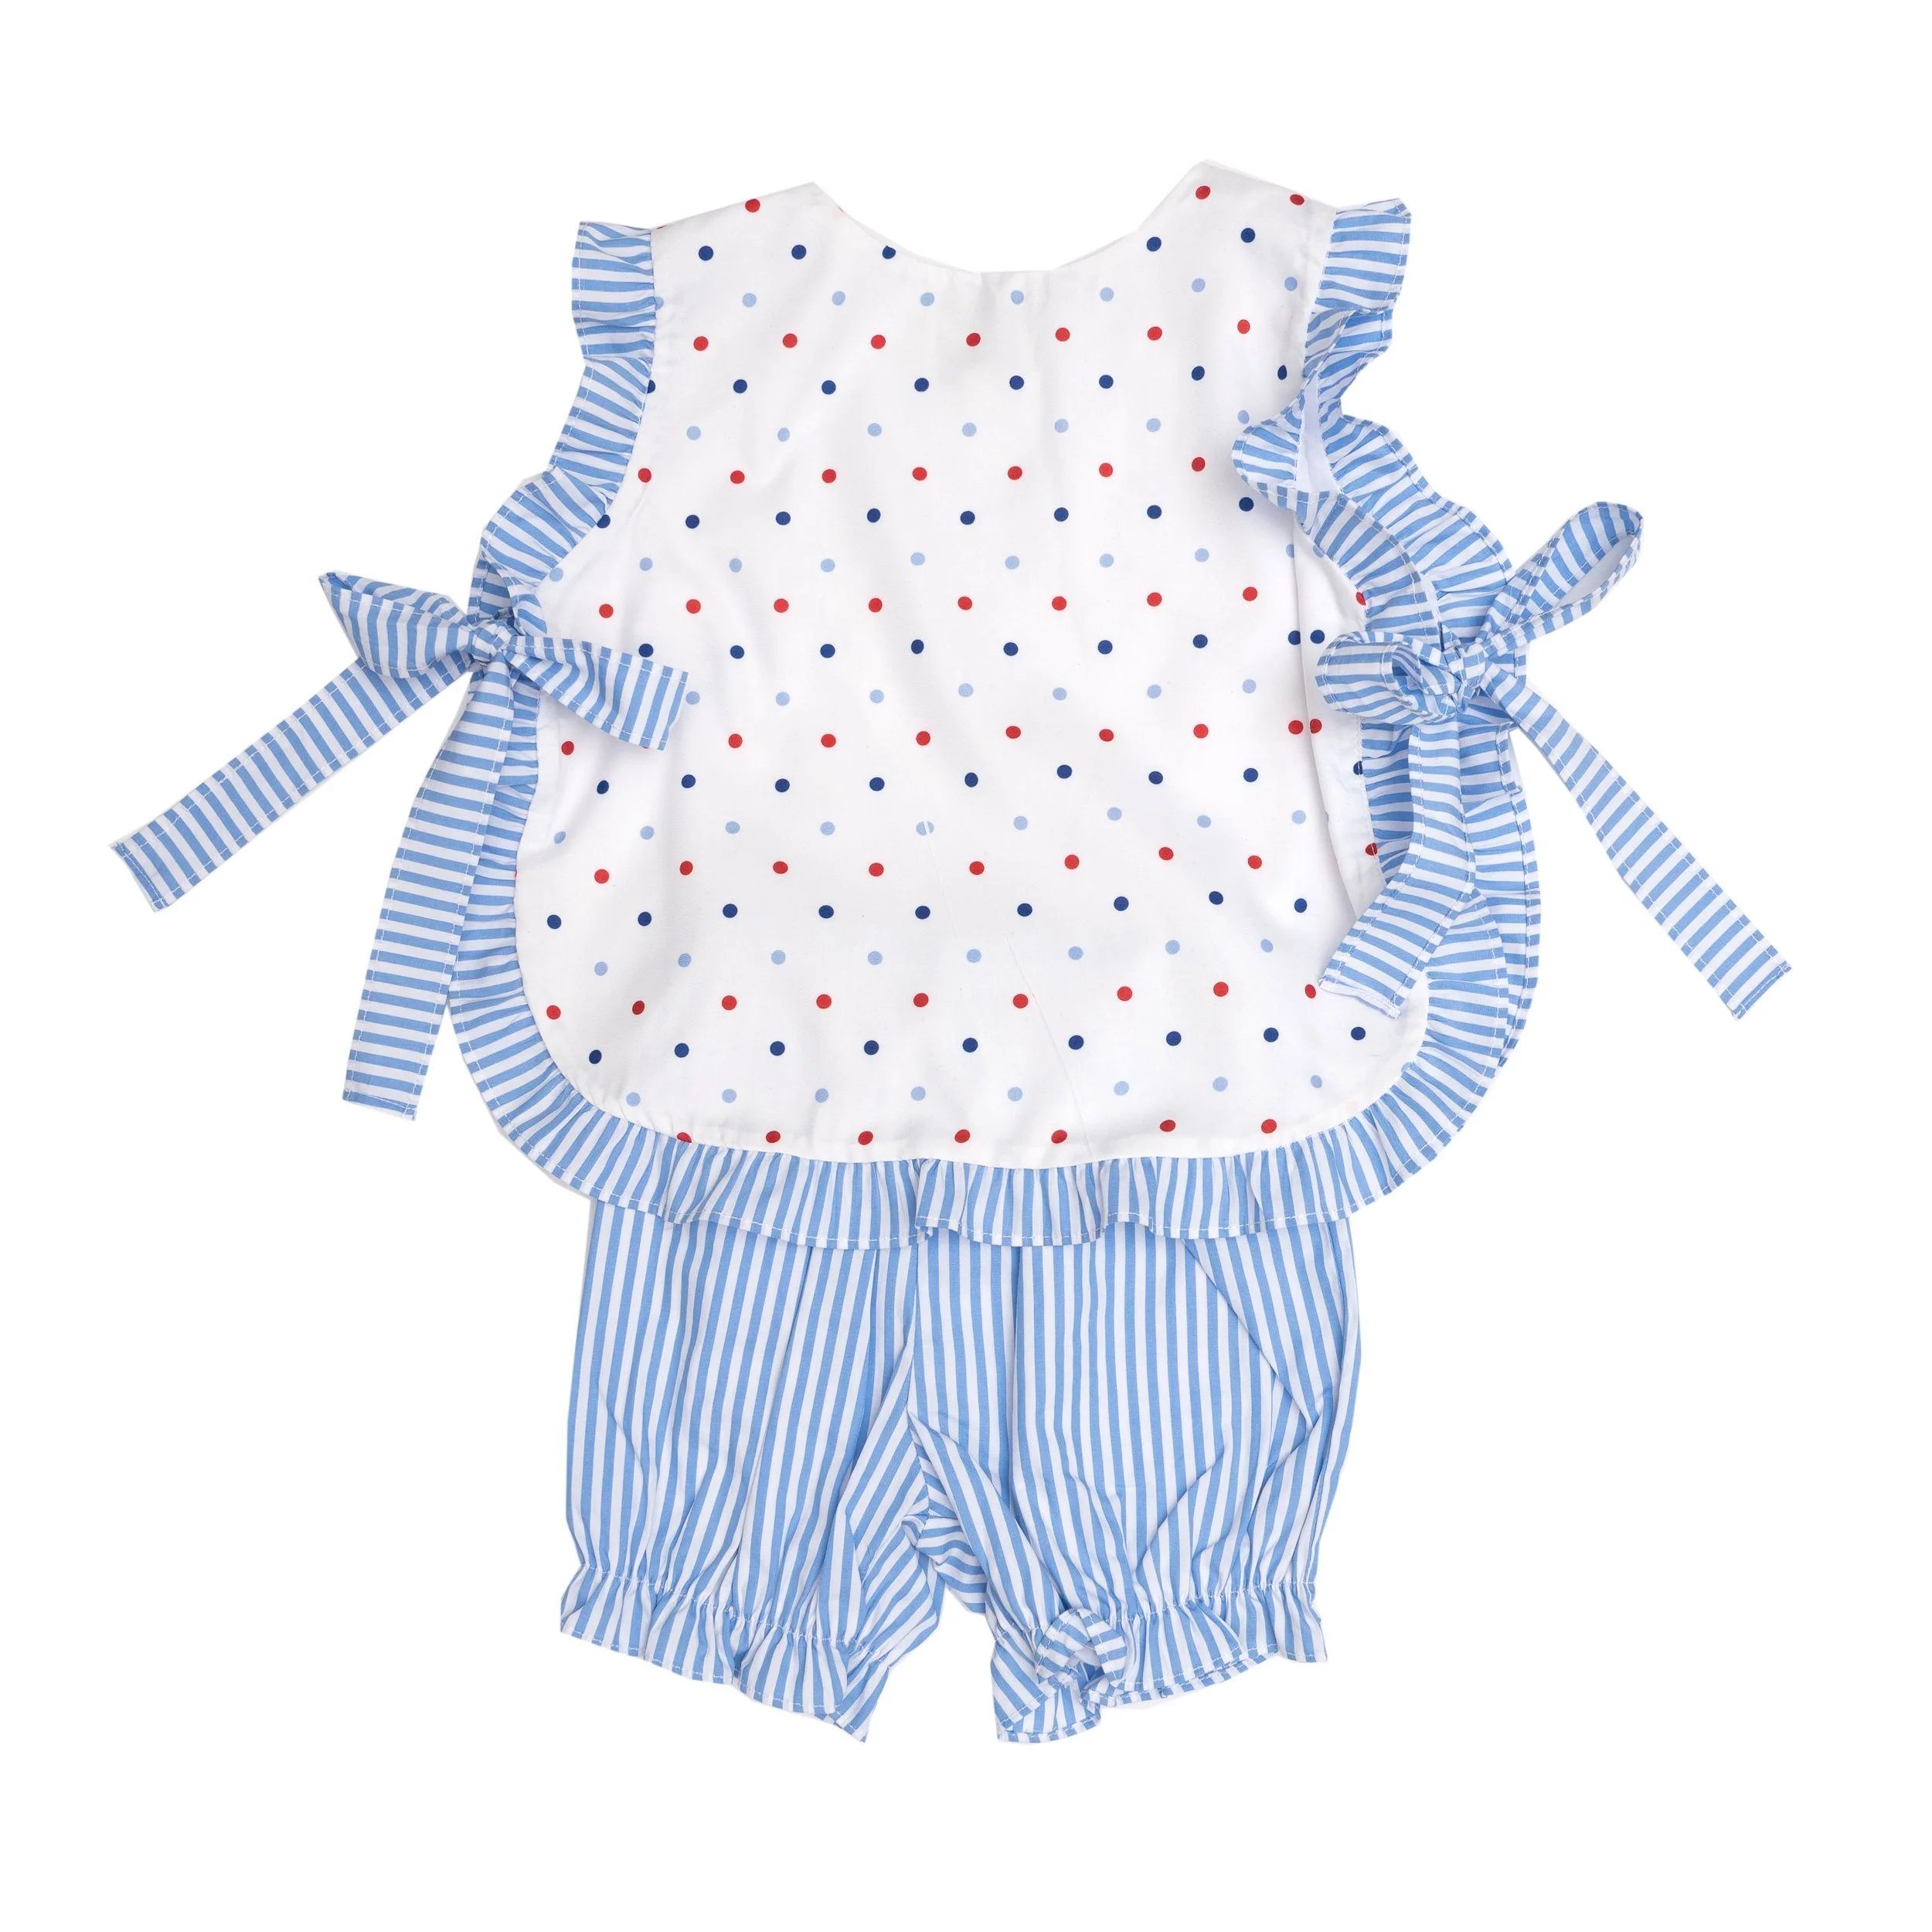 Lily White and Blue Bloomer Set | The Oaks Apparel Company